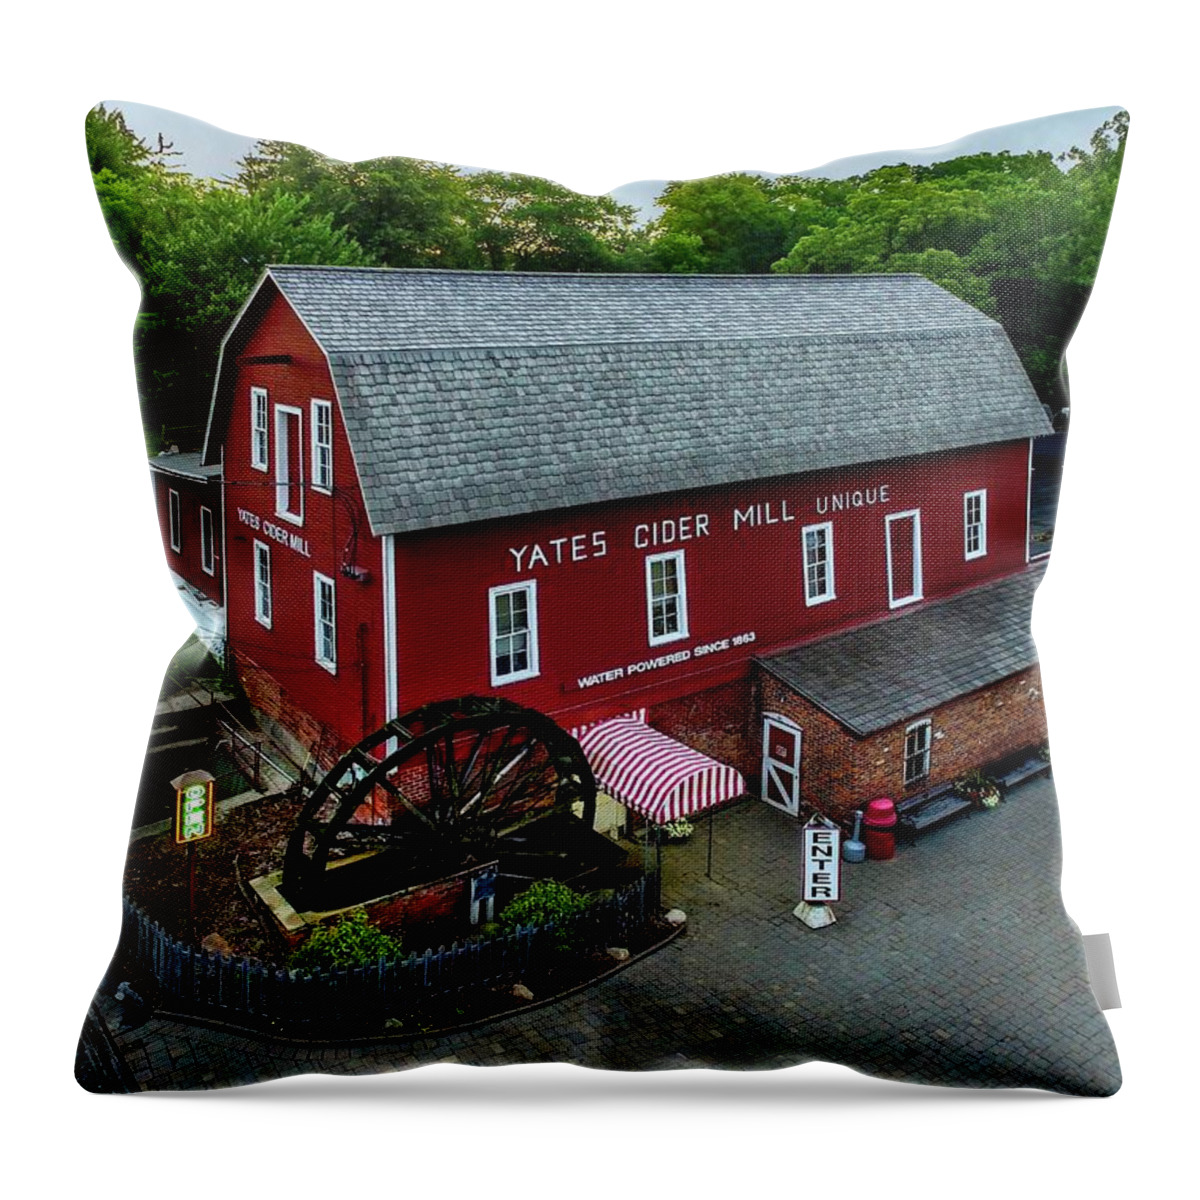 Rochester Throw Pillow featuring the digital art Yates Cider Mill DJI_0056 by Michael Thomas